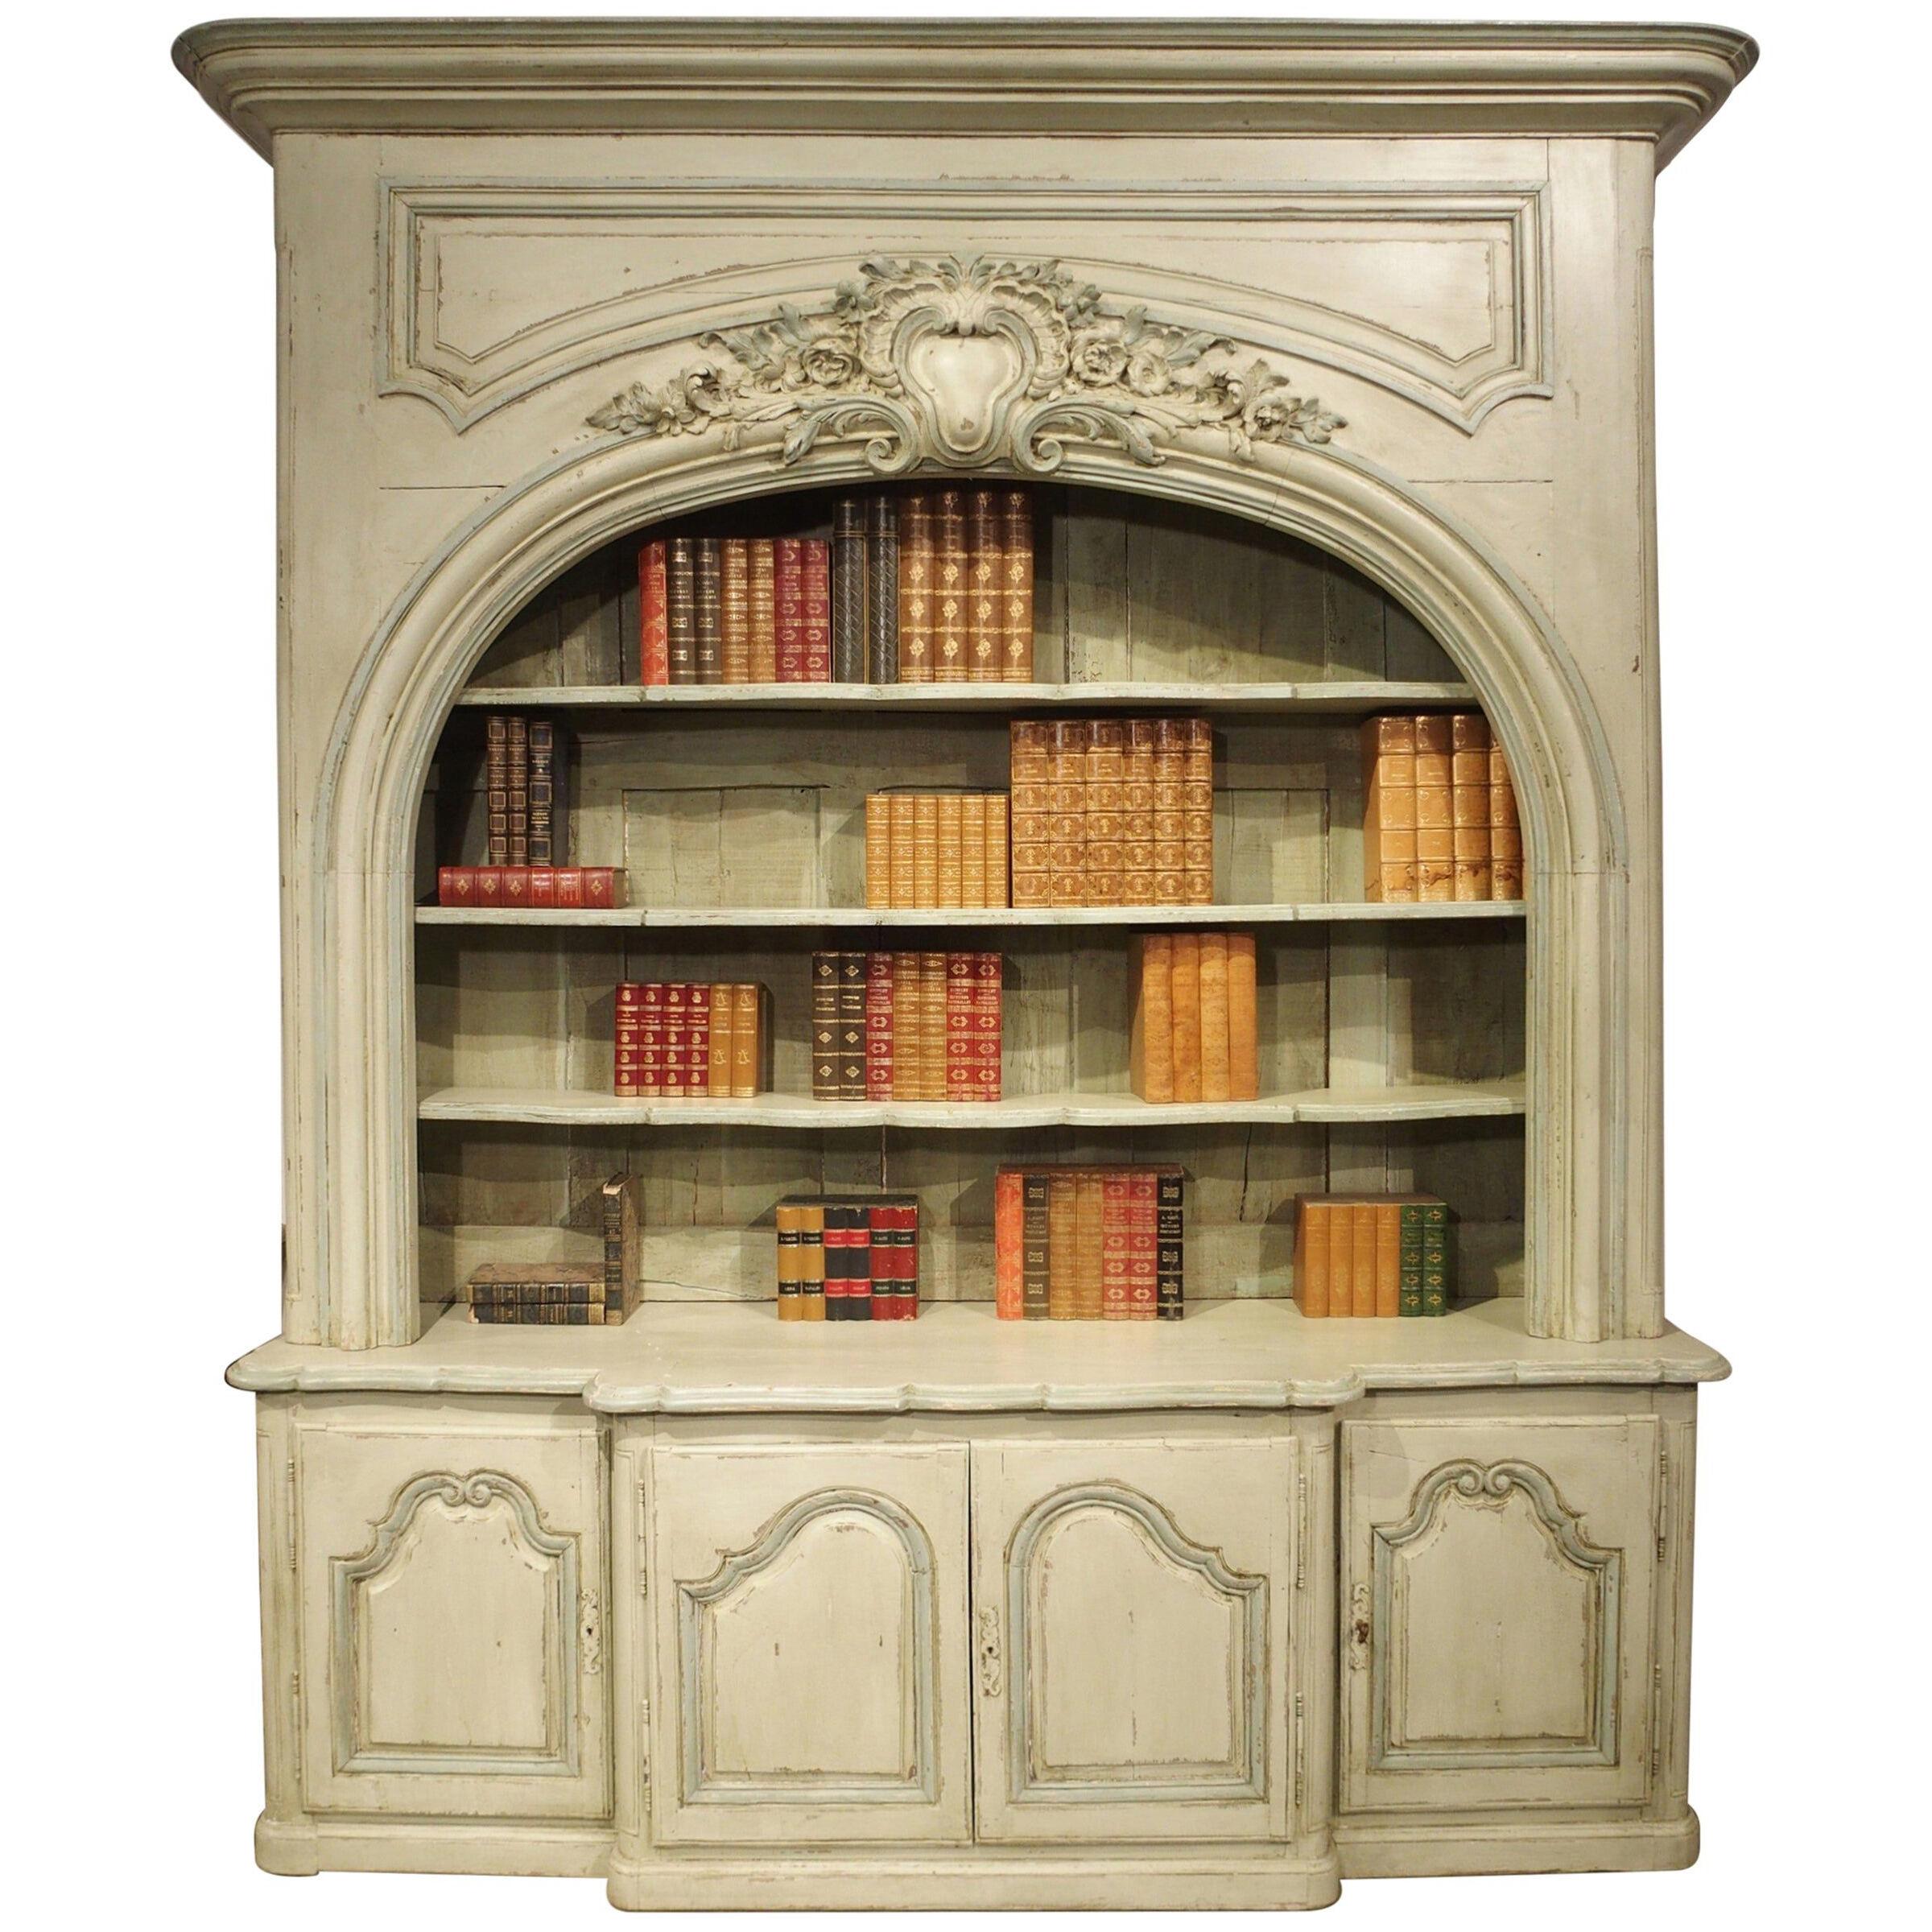 Stunning Painted Bibliotheque Enfilade from a Chateau Near Lauragais, France